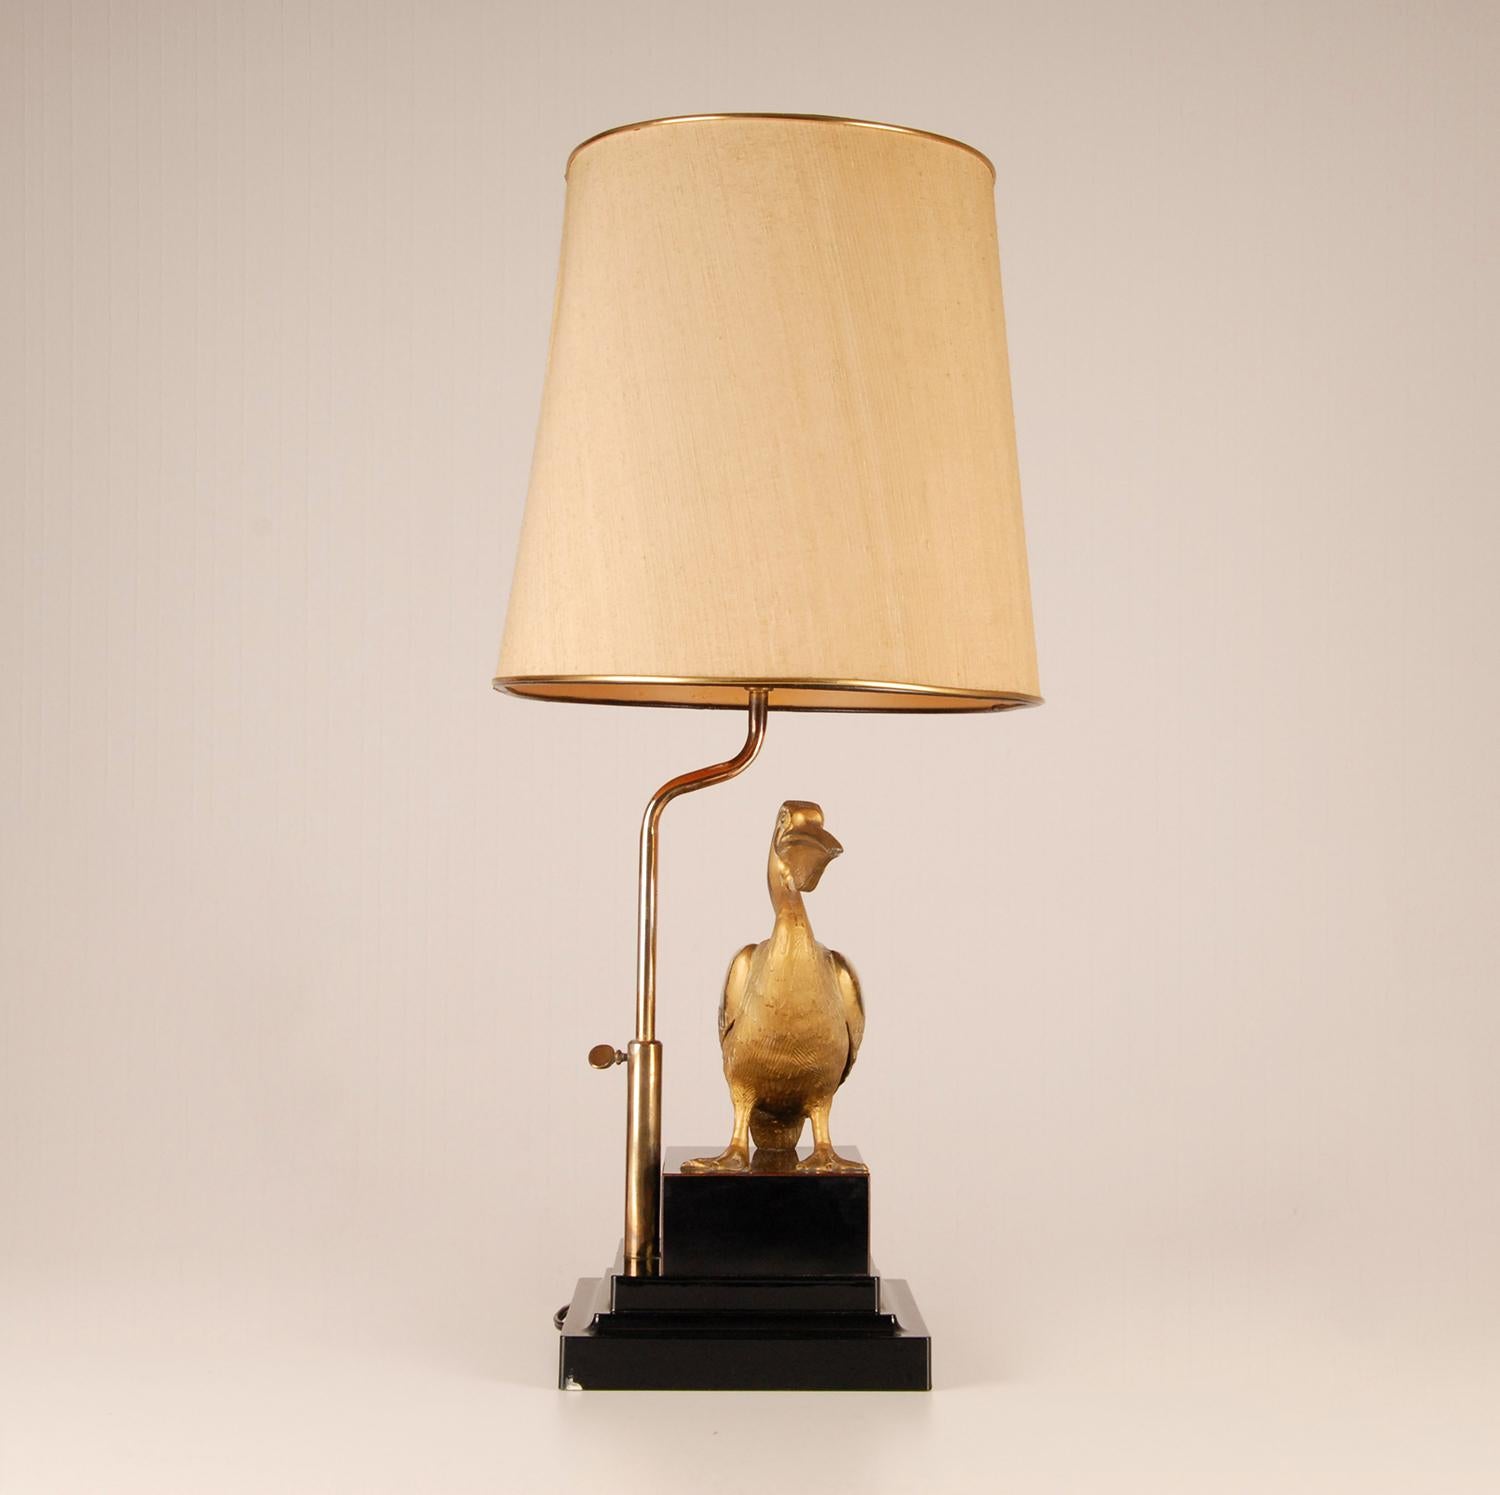 French Maison Charles Gilt Brass Black Figural Table Lamp Pelican 1970s Mid Century